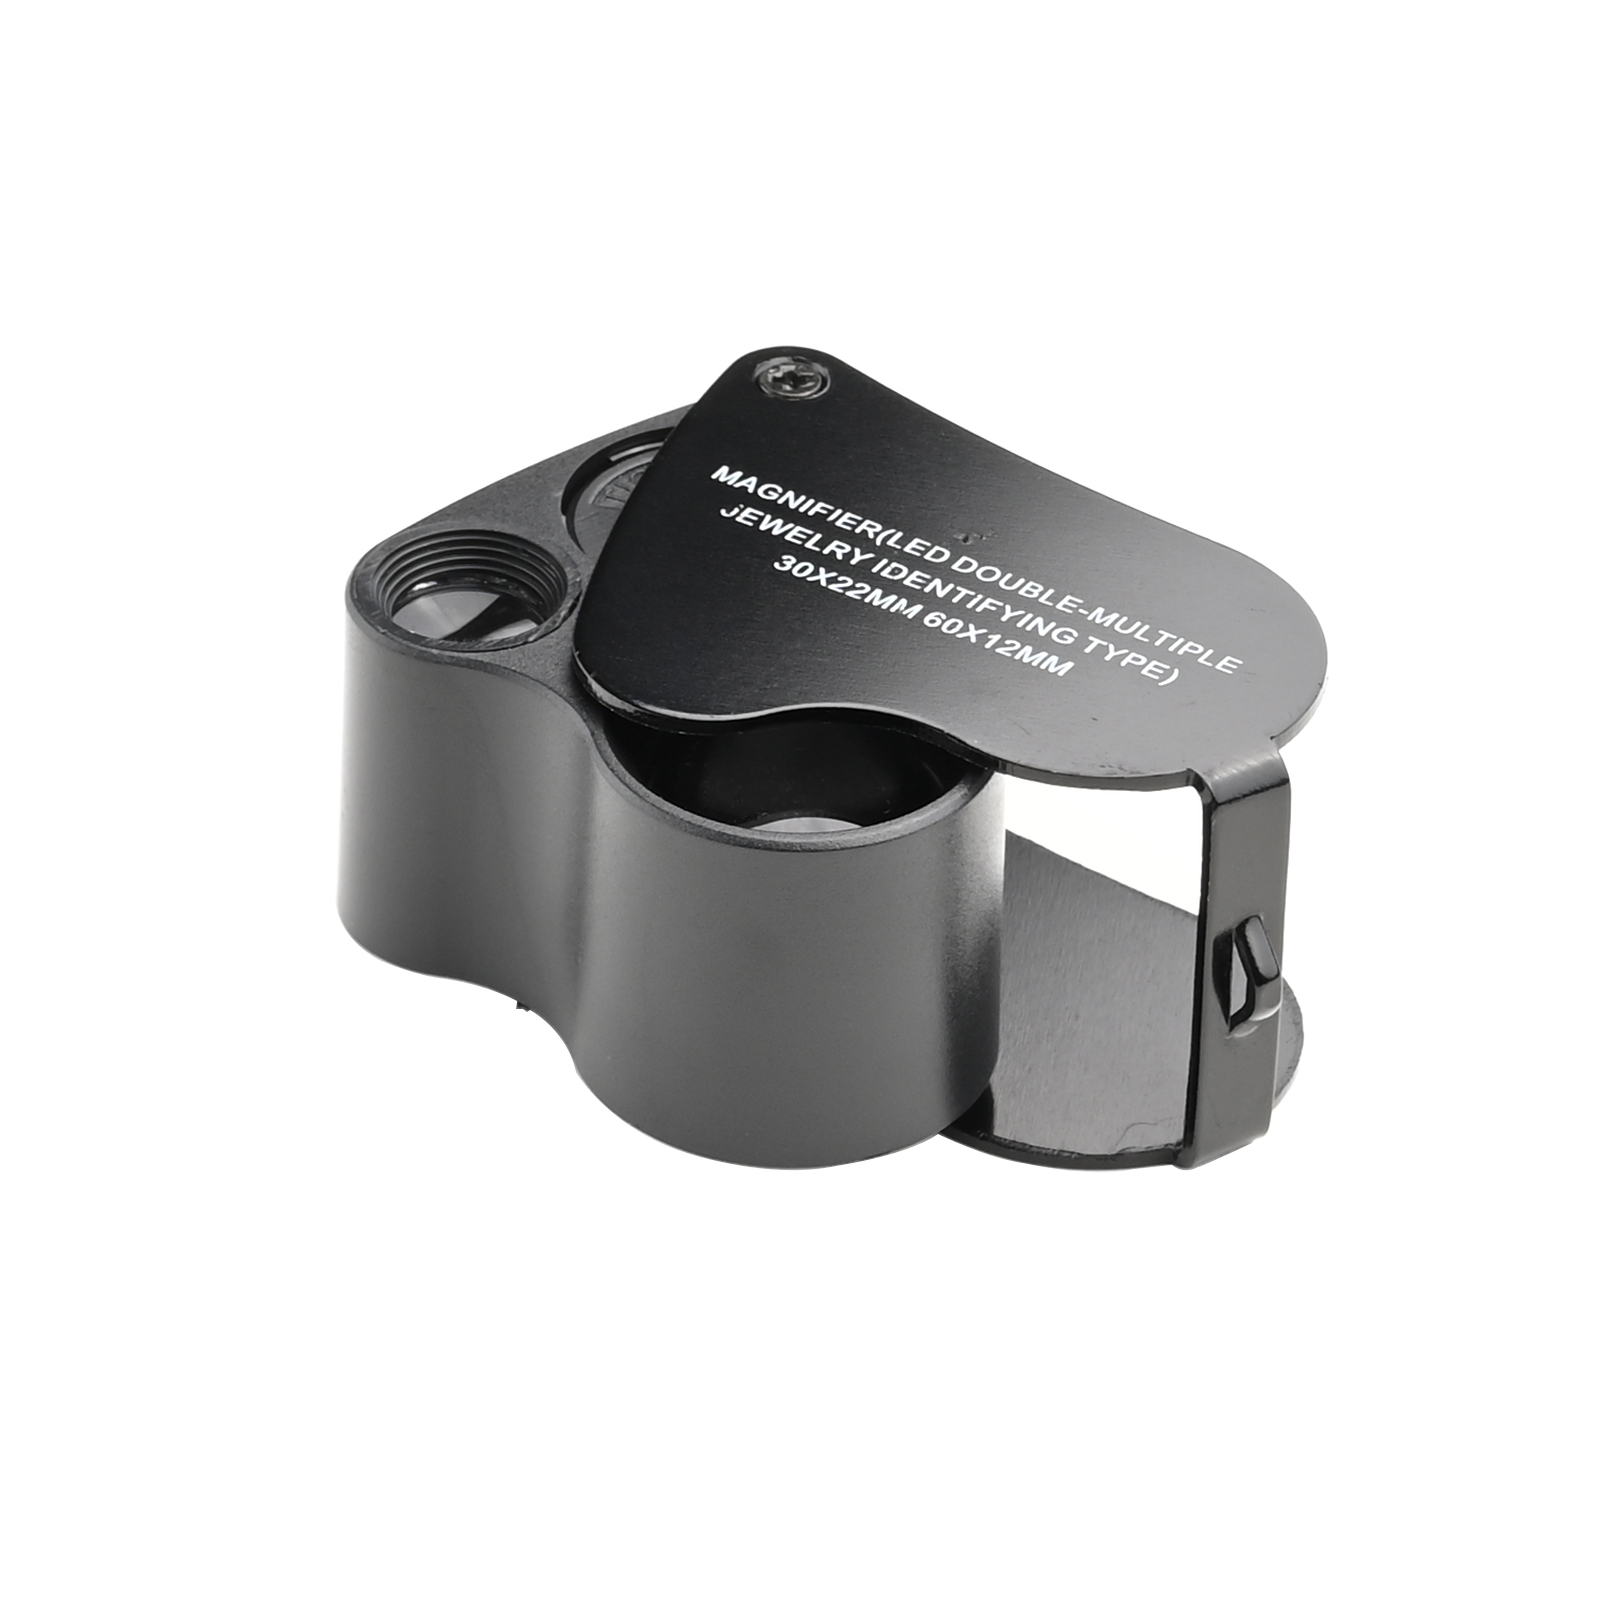 JARLINK 30x 60x Illuminated Jewelers Eye Loupe Magnifier for sale online